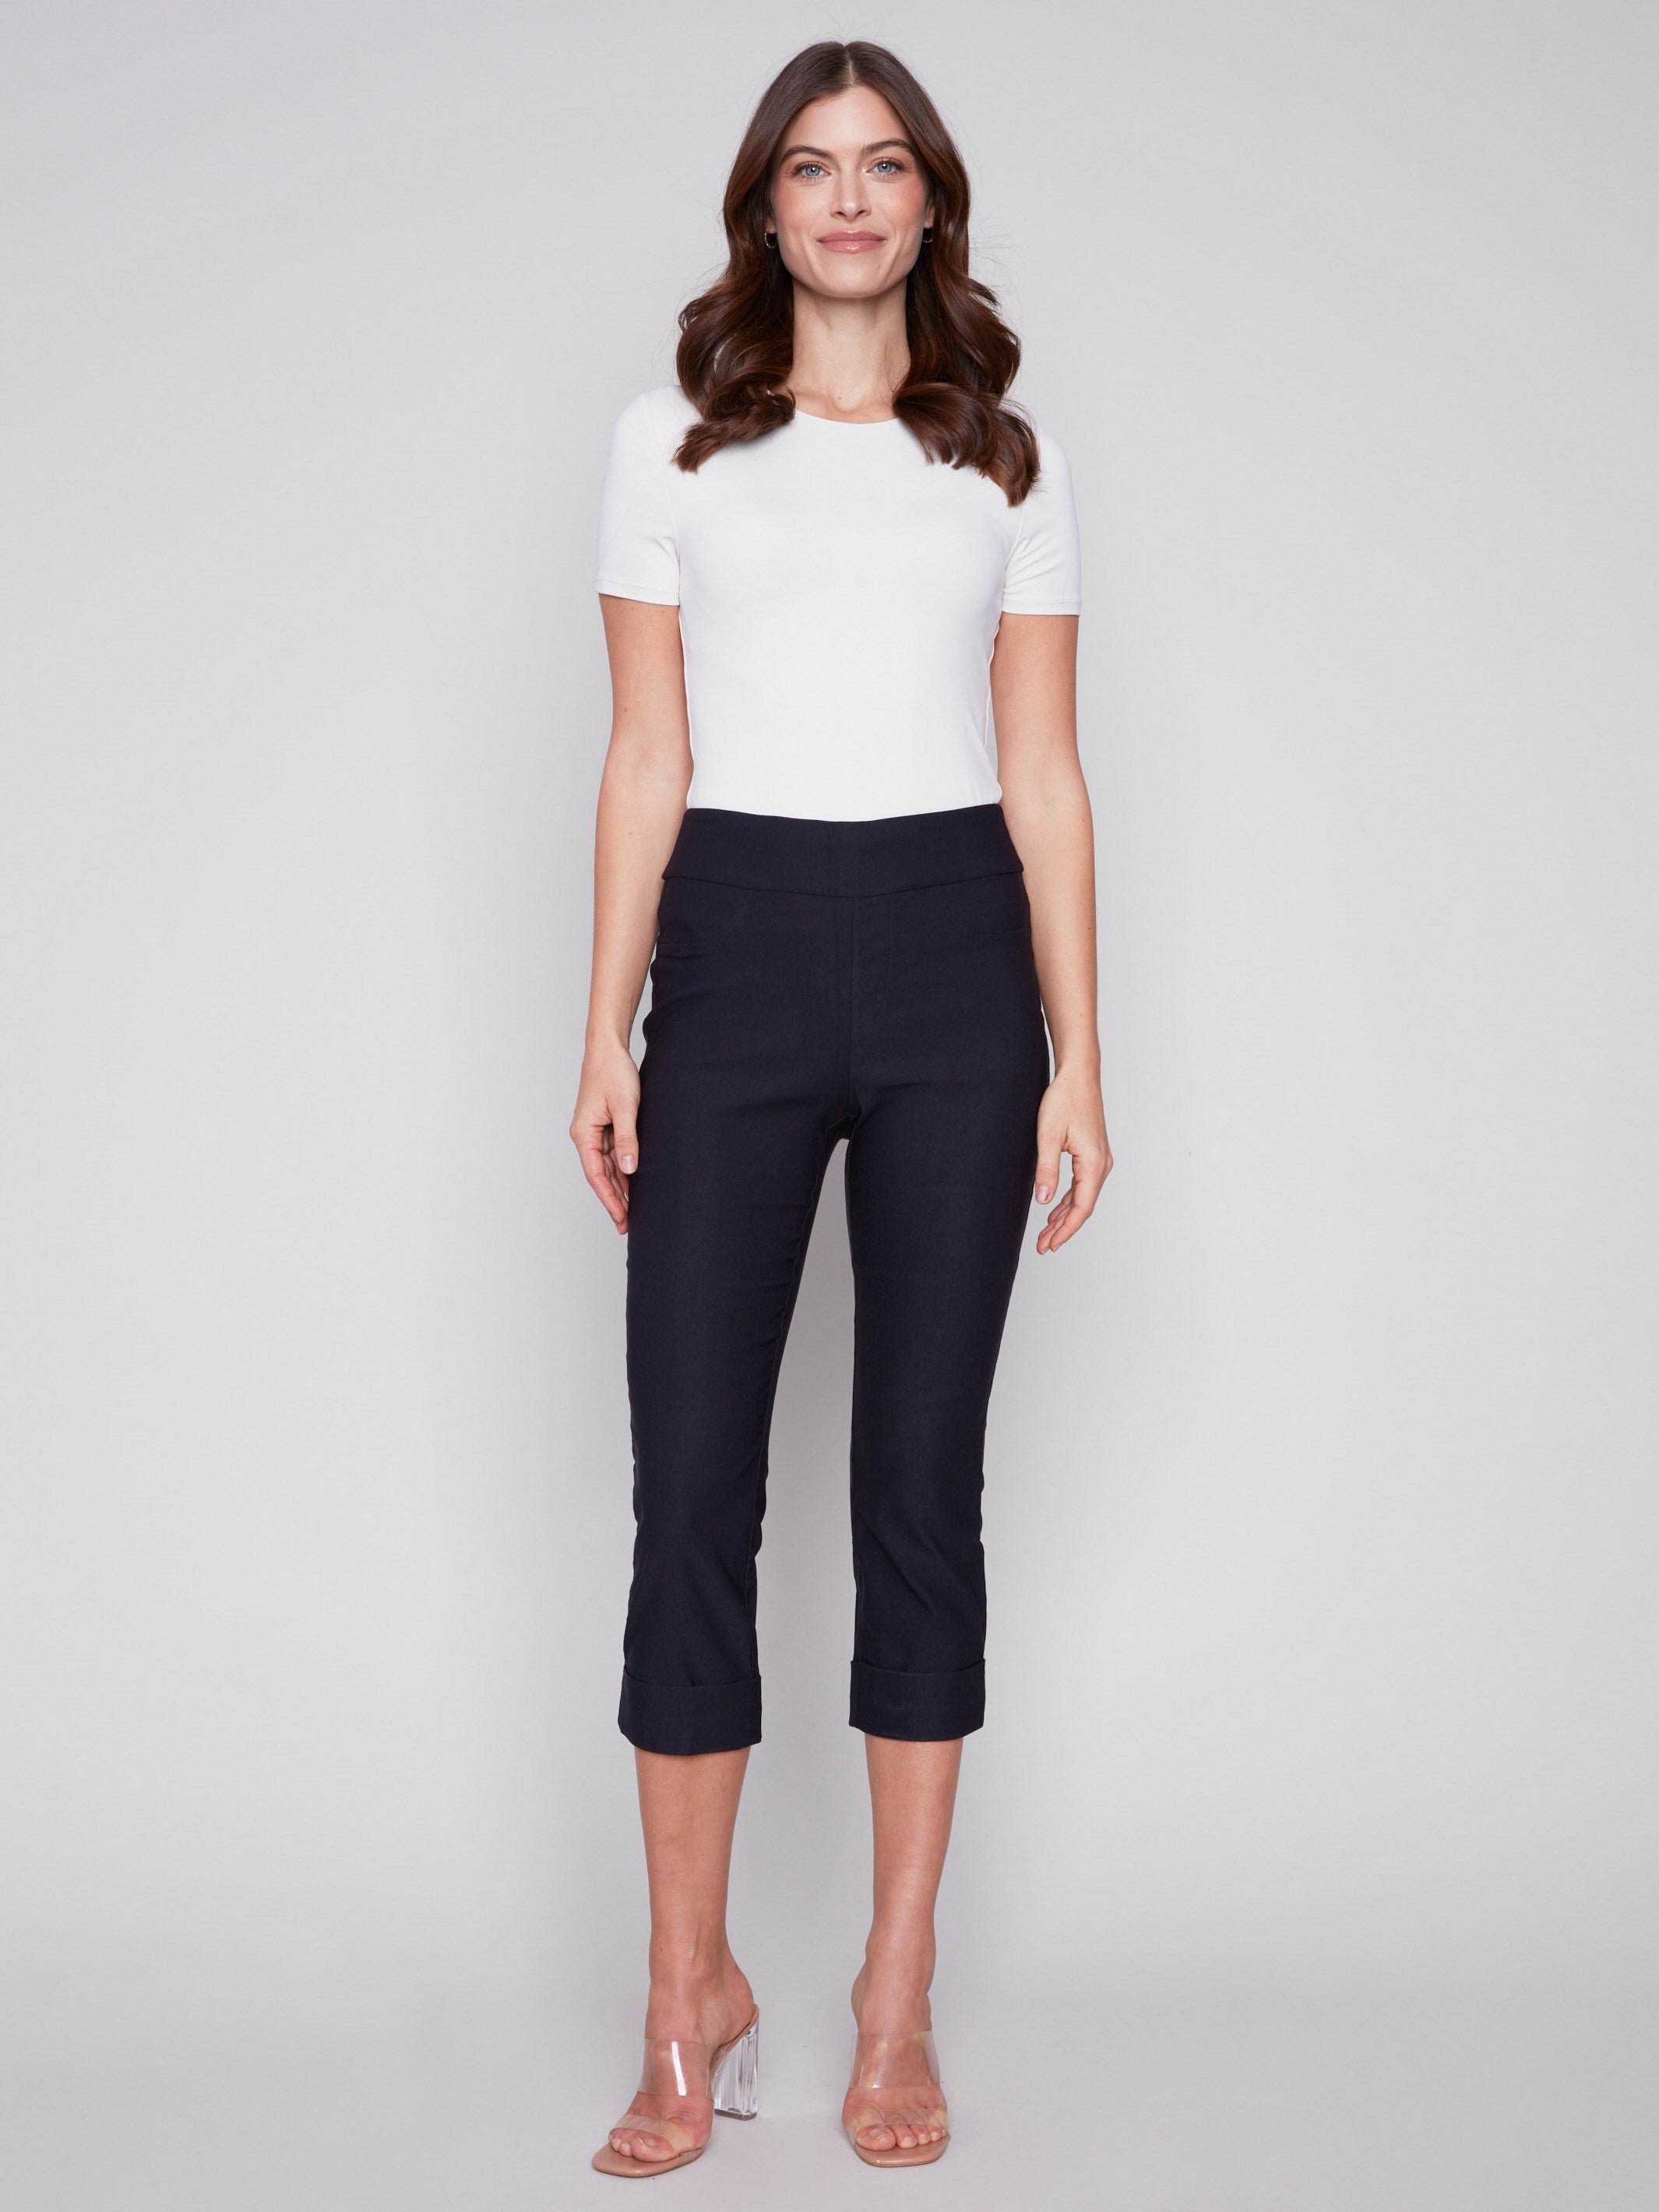 Stretch Pull-On Capri Pants - Navy - Charlie B Collection Canada - Image 3